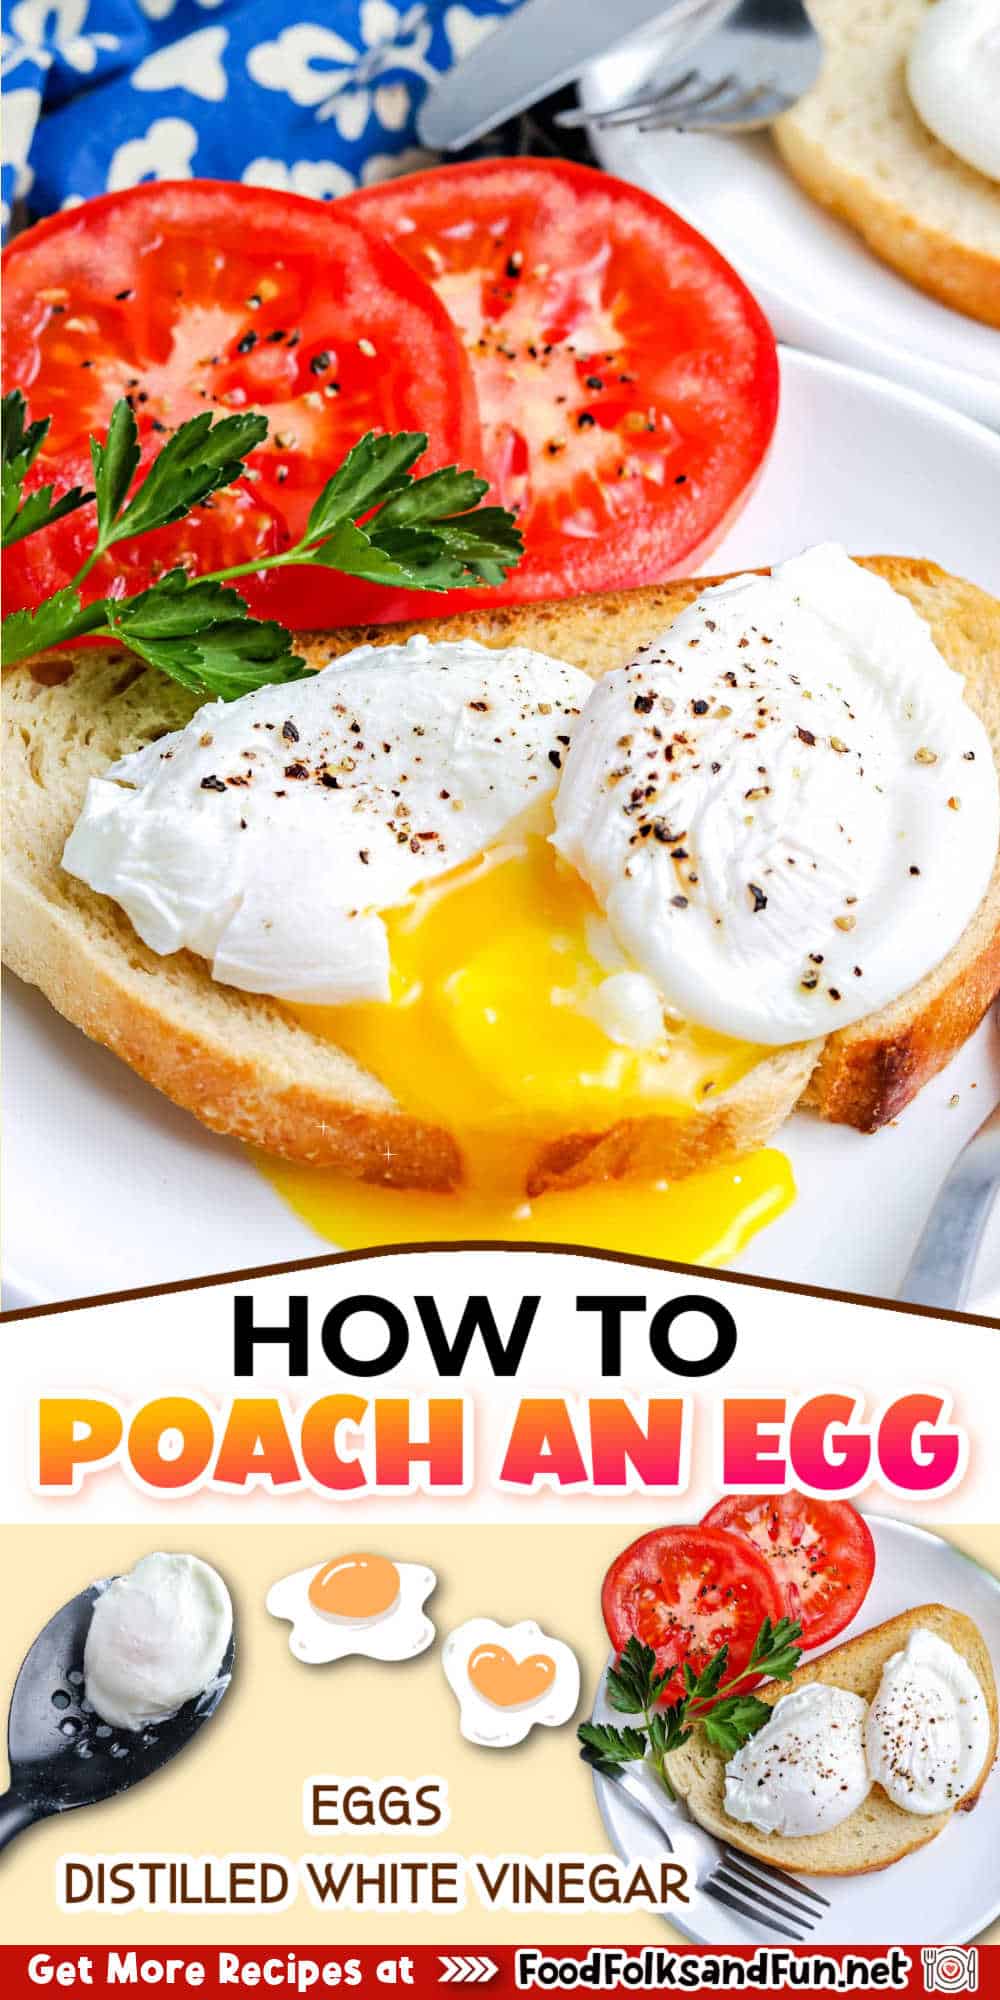 Making poached eggs is simple. All you need is eggs, vinegar, and water. This tutorial for How To Make Poached Eggs is a foolproof method that yields perfect results every time. via @foodfolksandfun